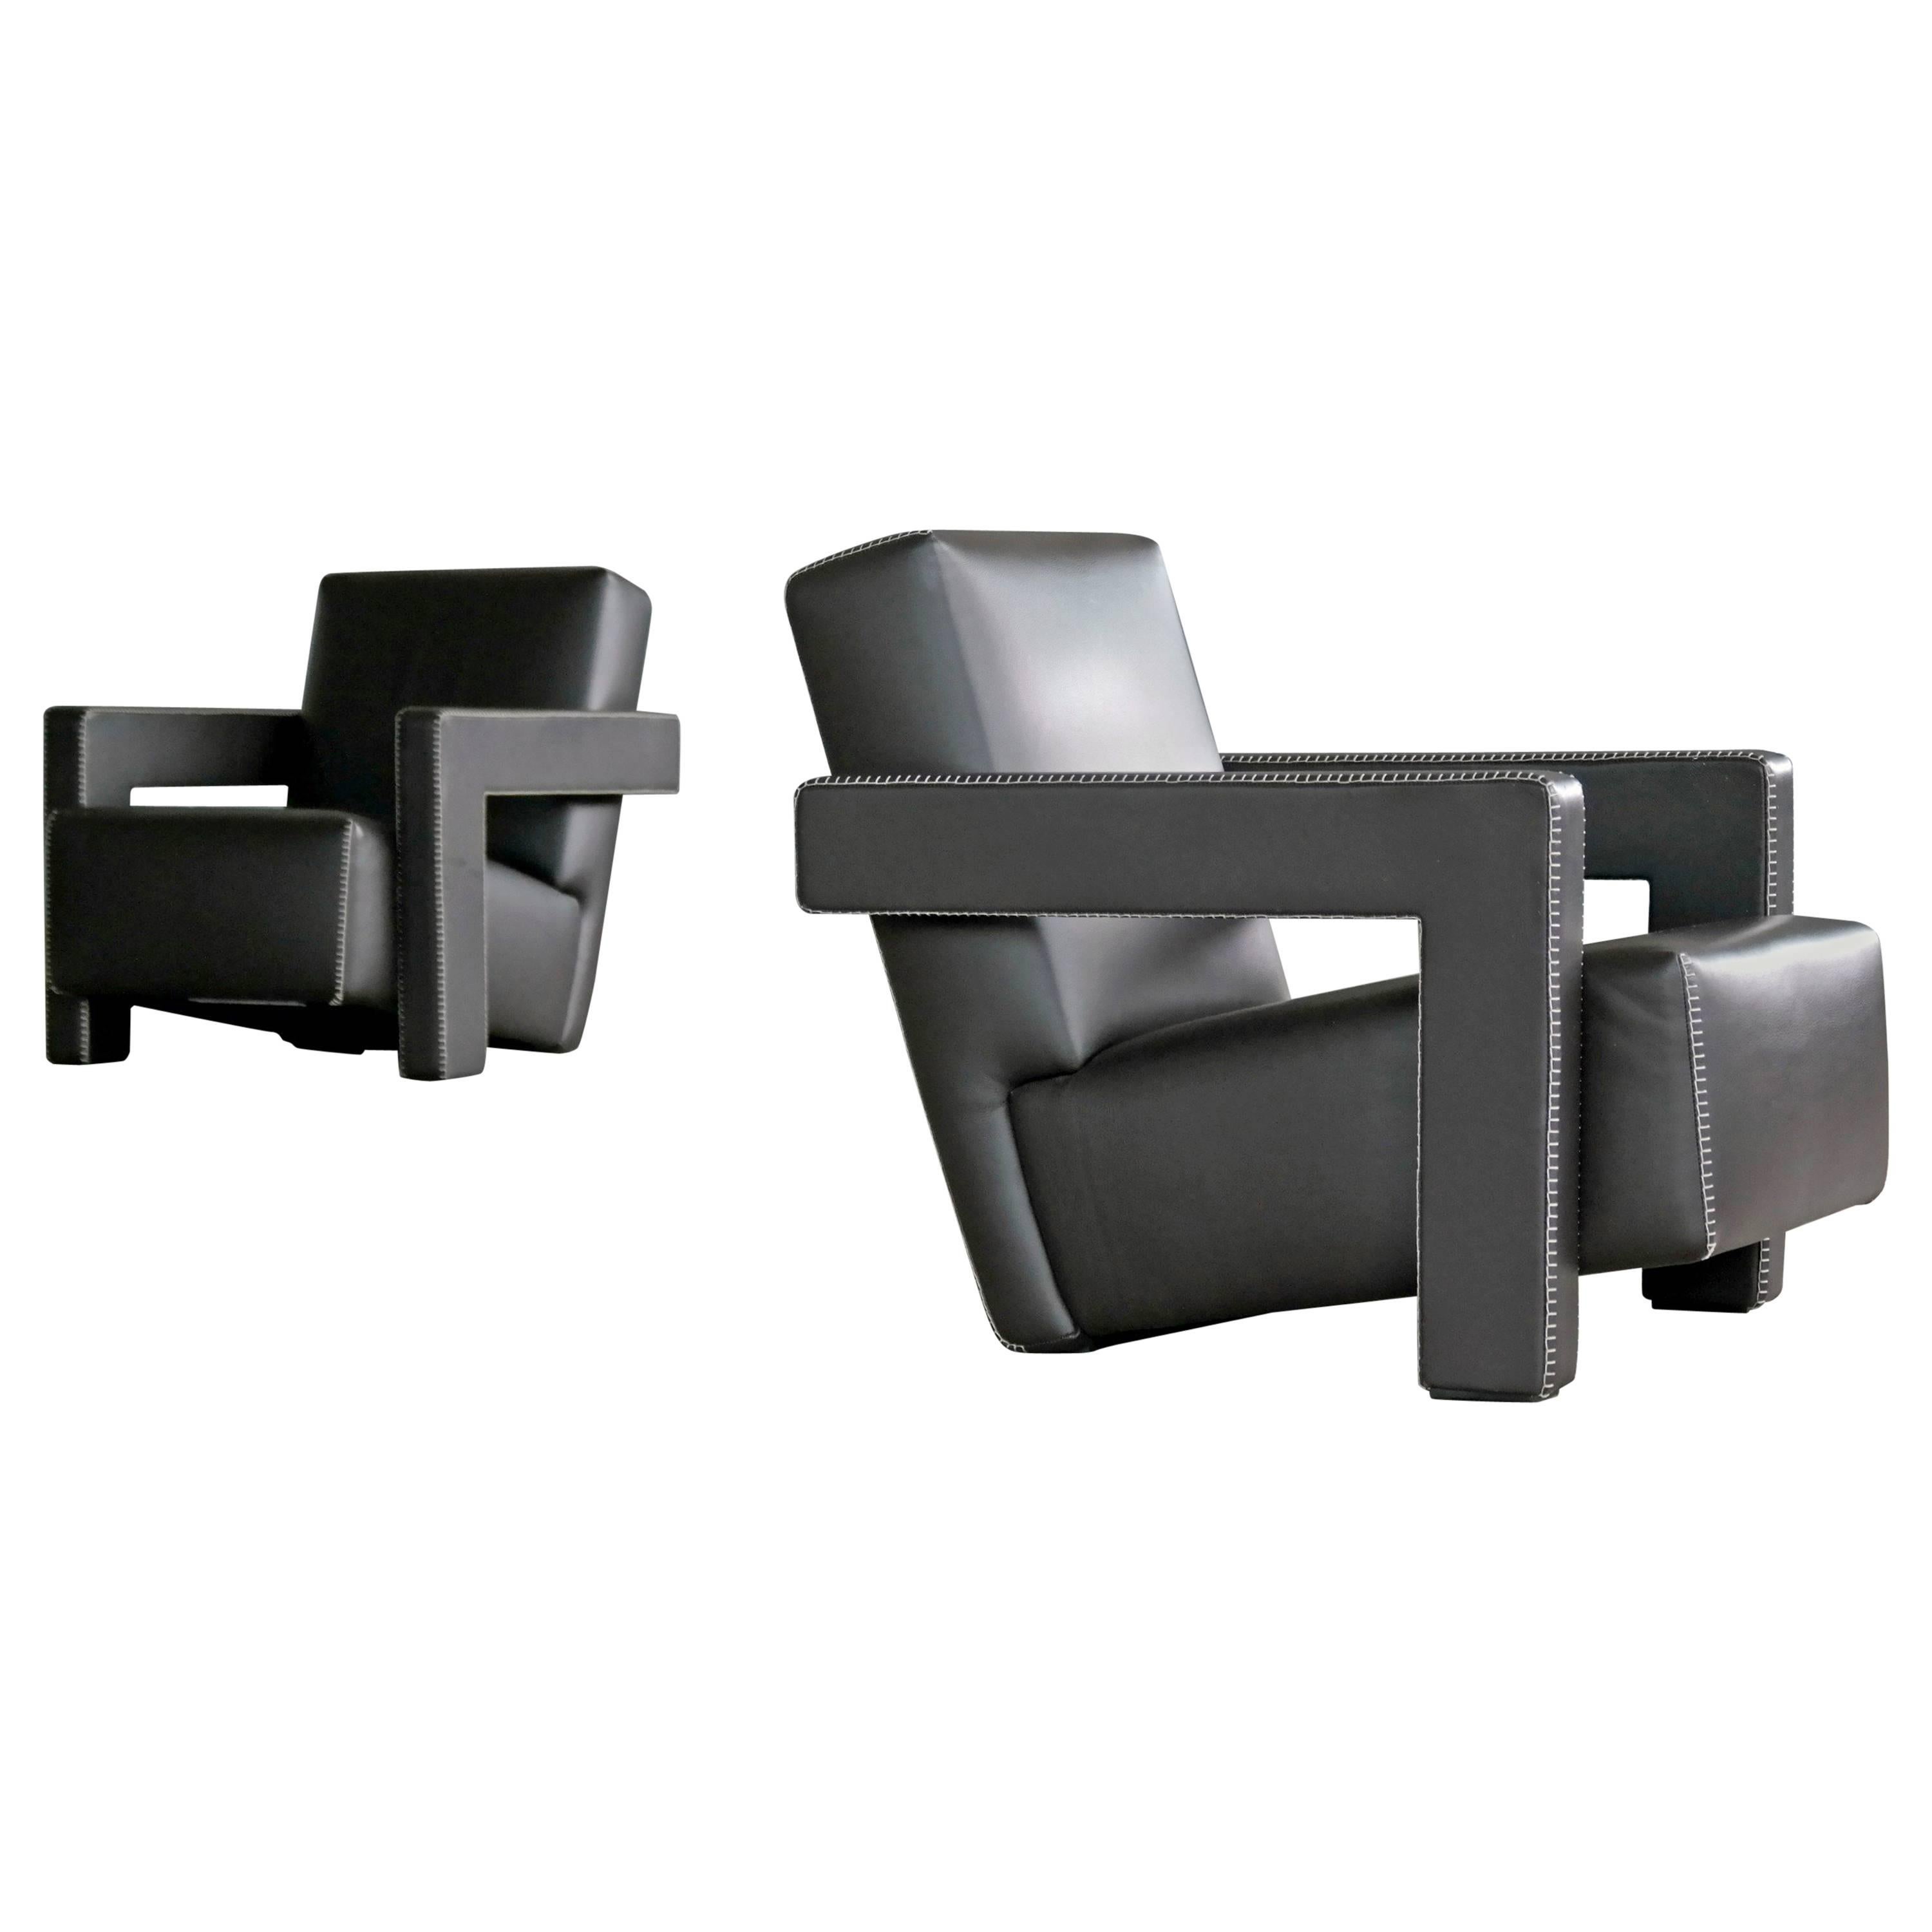 Gerrit Rietveld Pair of Utrecht Lounge Chairs in Dark Mocha Leather by Cassina